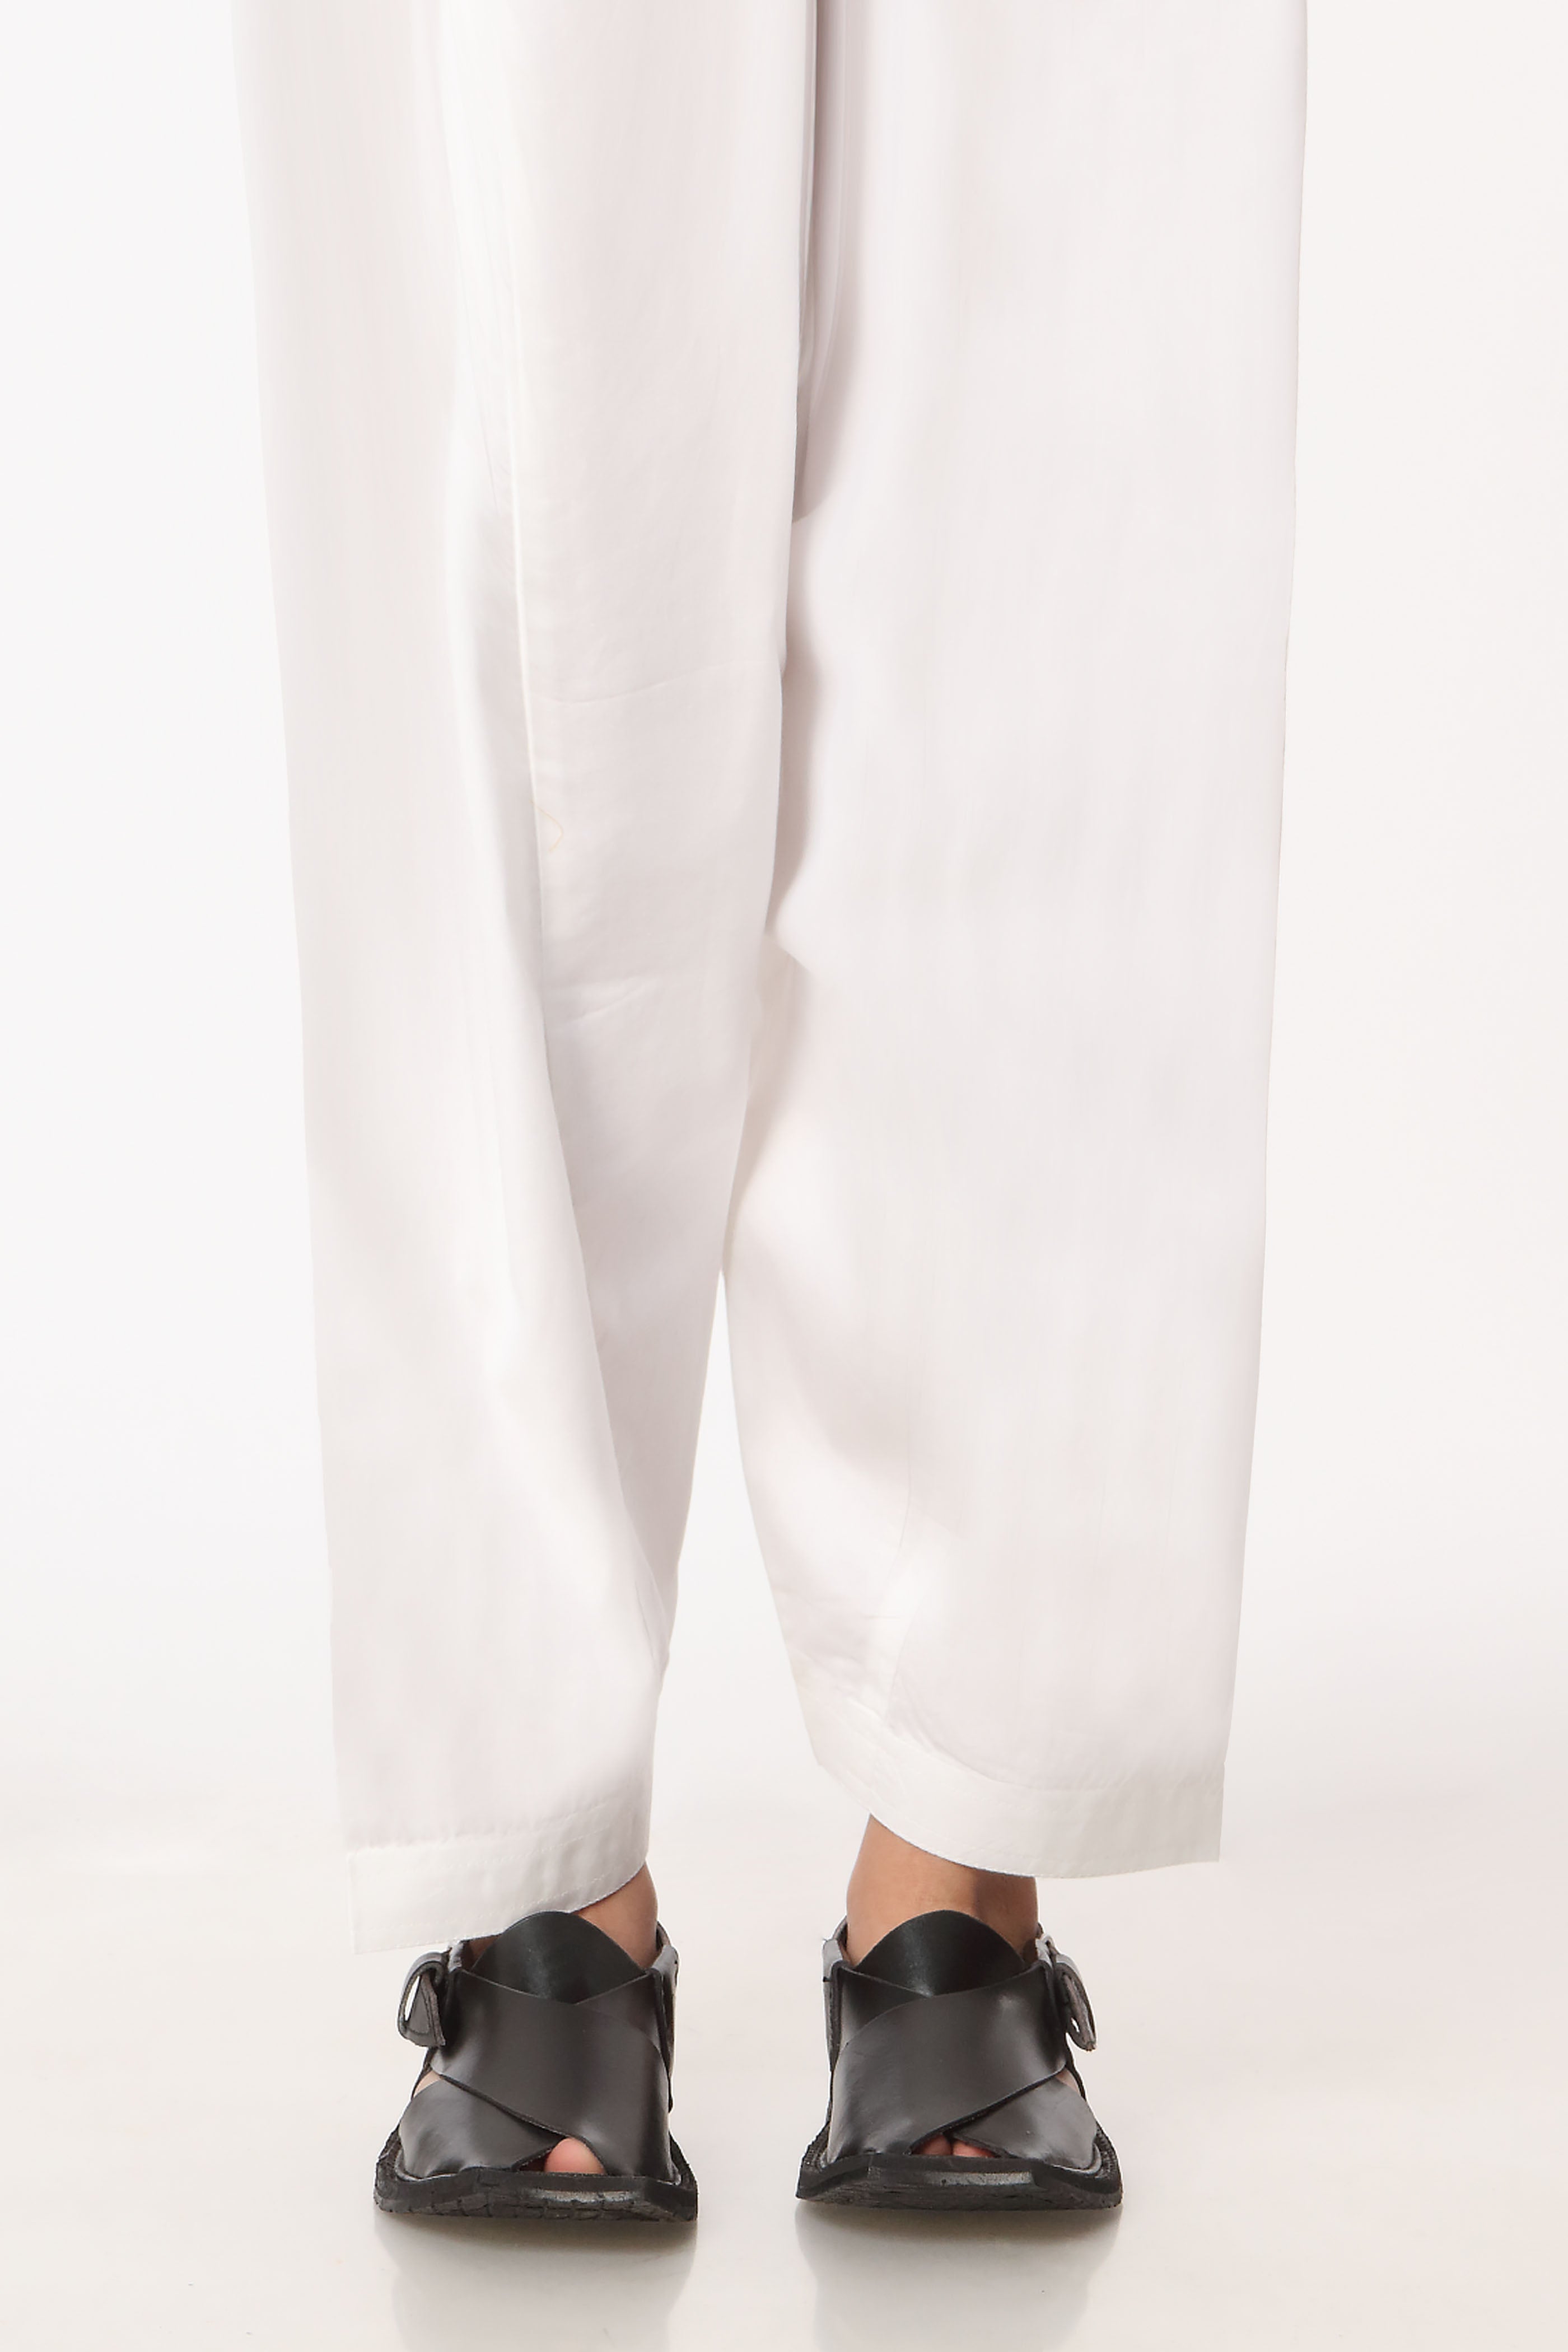 Shalwar - Soft Cambric | White - Best Kids Clothing Brands In Pakistan Online|Minnie Minors